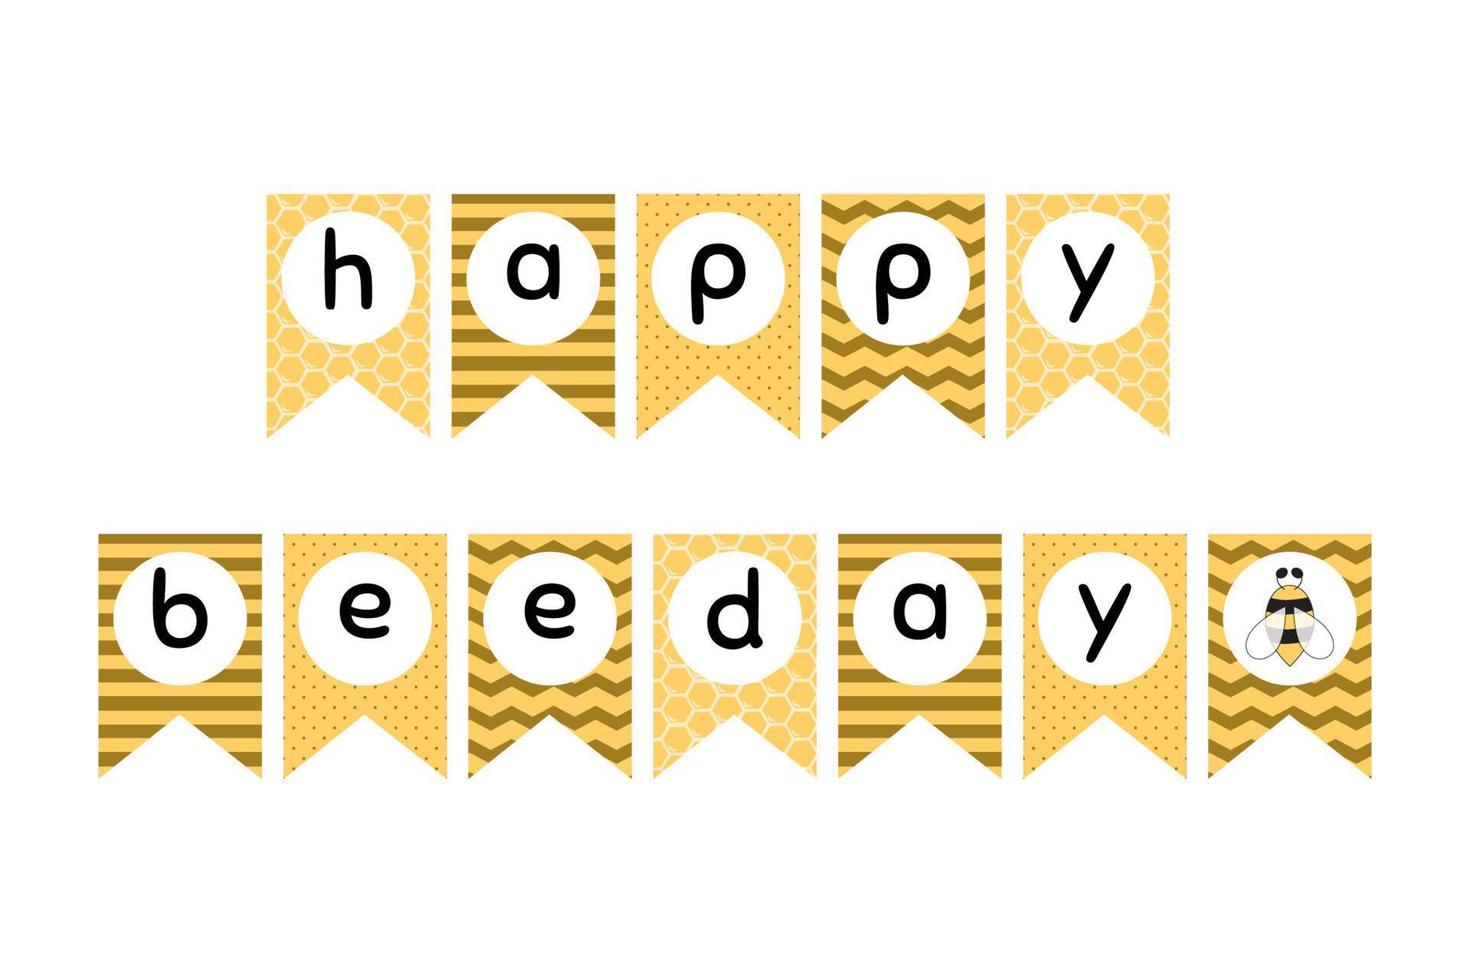 Happy Bee Day flags. Honey Bee party decoration graphic elements. Sweet honey kids birthday party decor. Sweet Baby garland for girls and boys. Bunting flags. Cut Vector illustration.